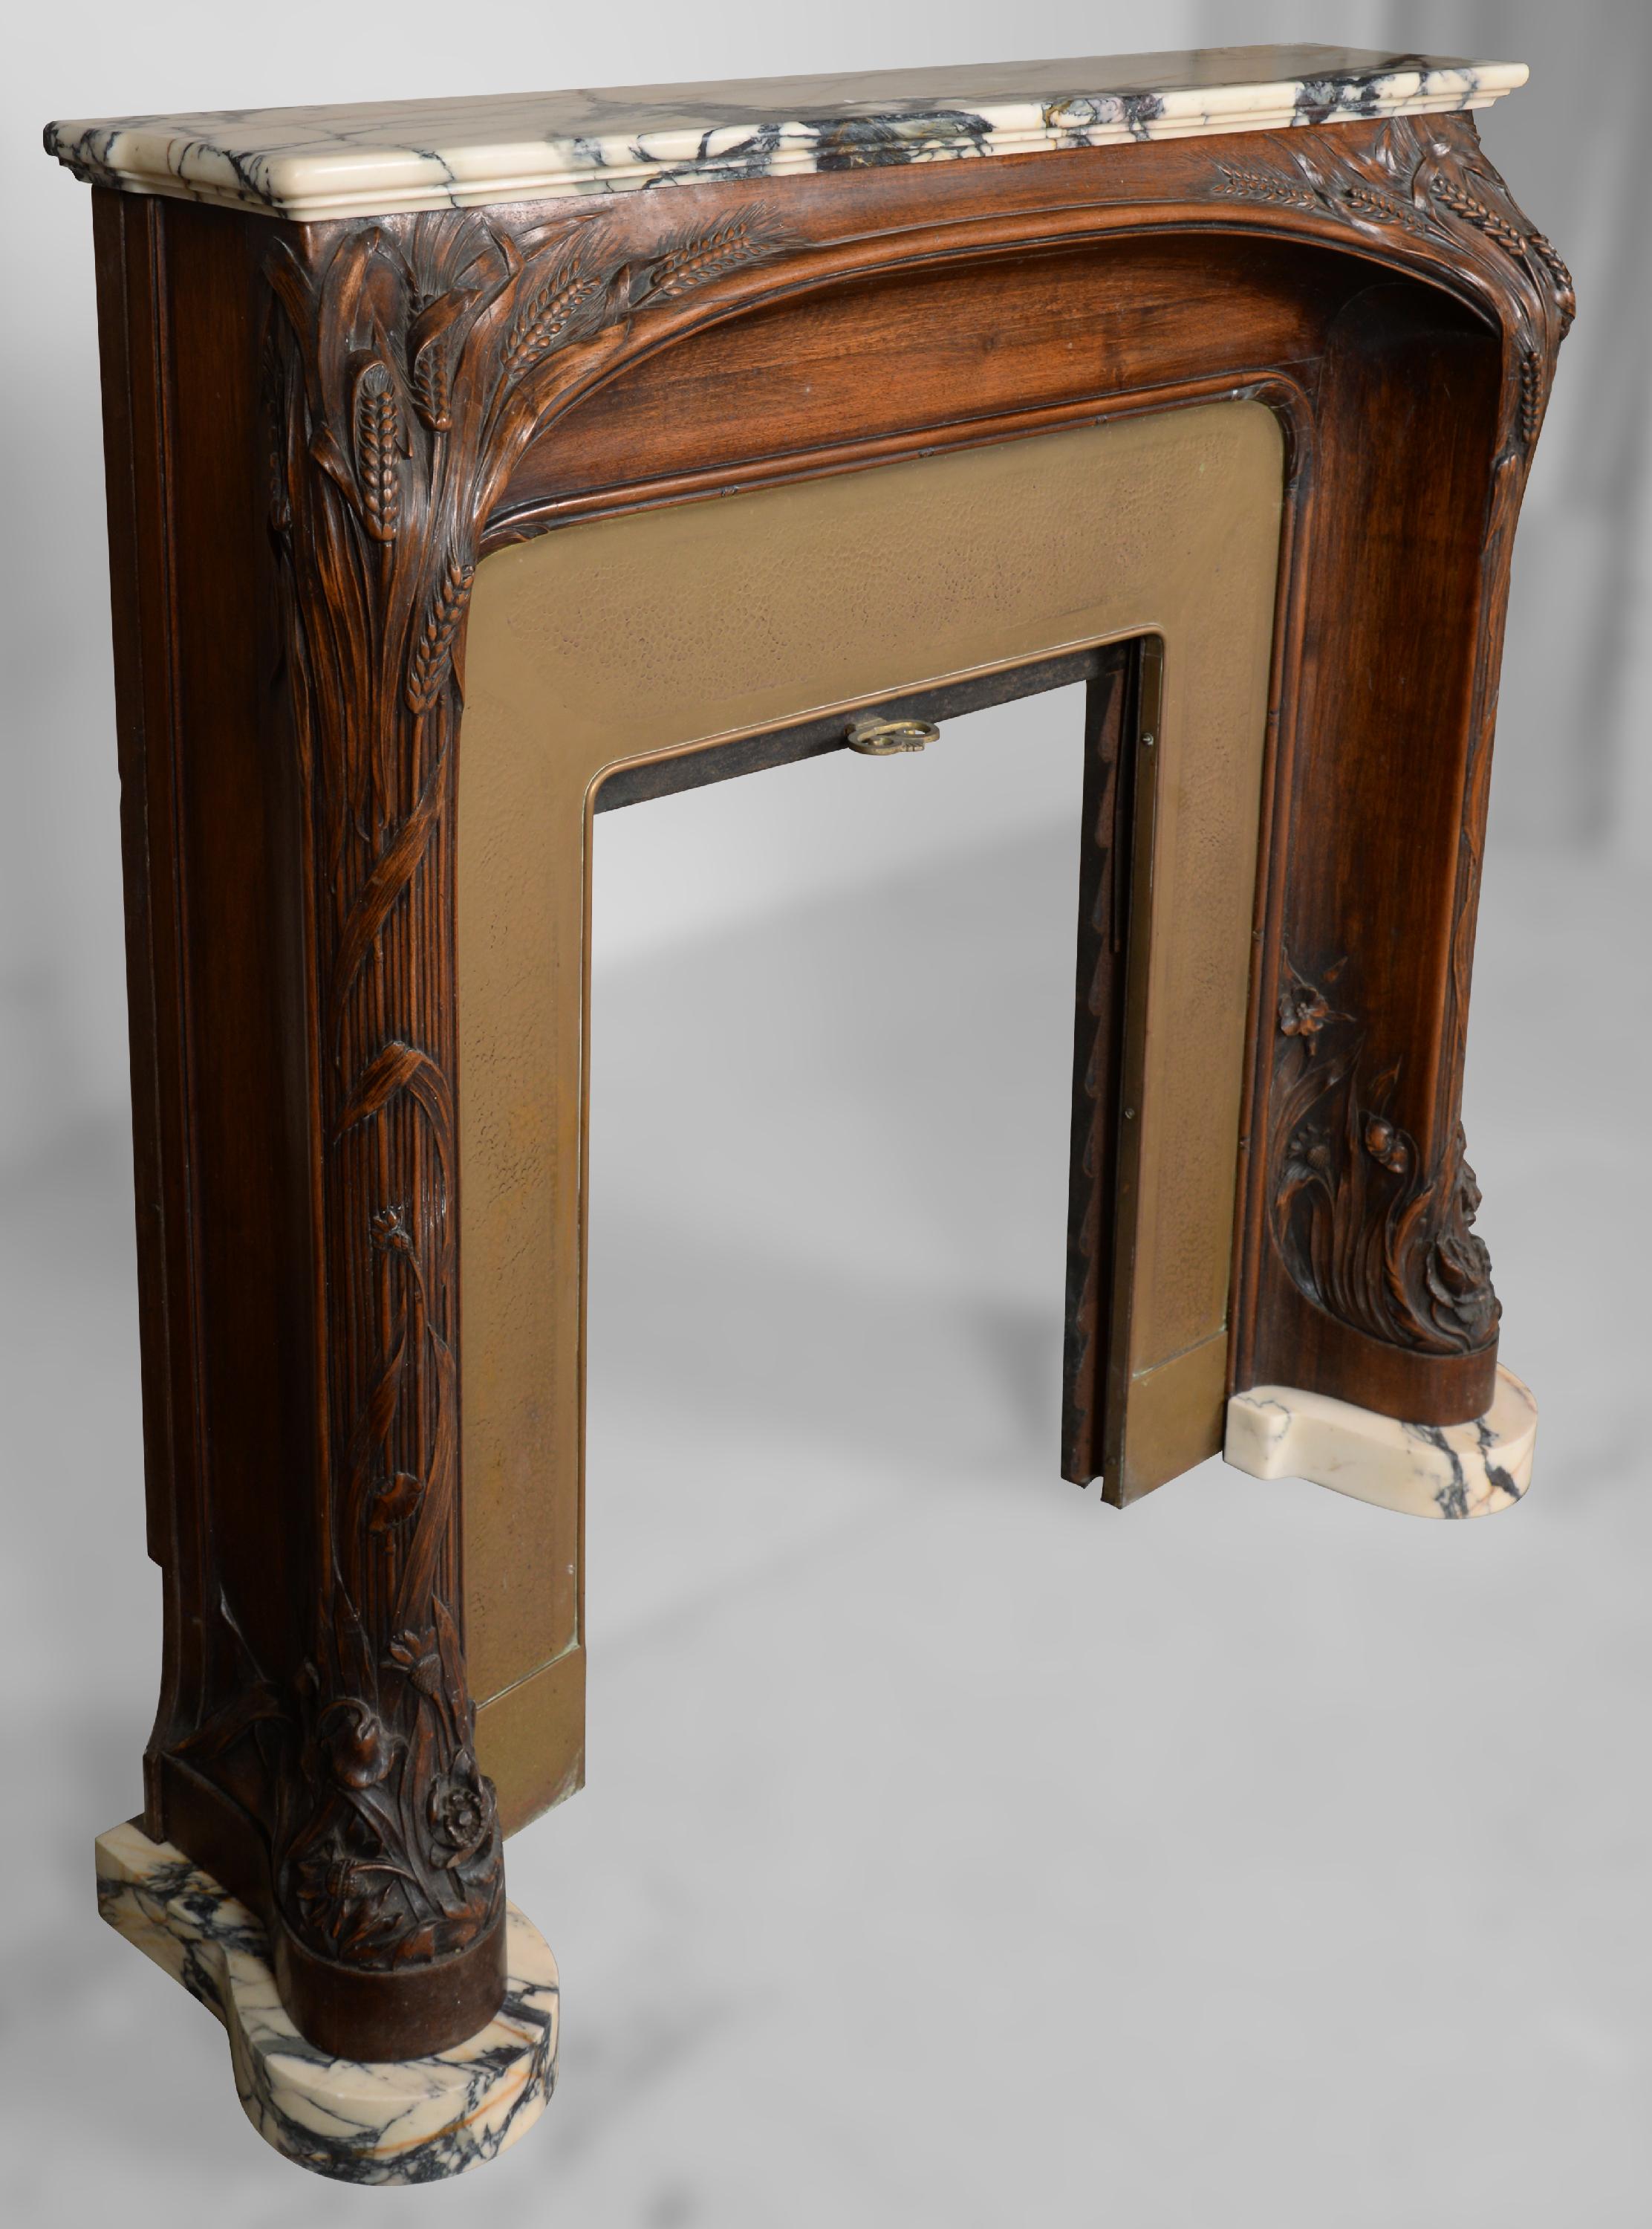 French Art Nouveau style fireplace in walnut wood and Panazeau marble